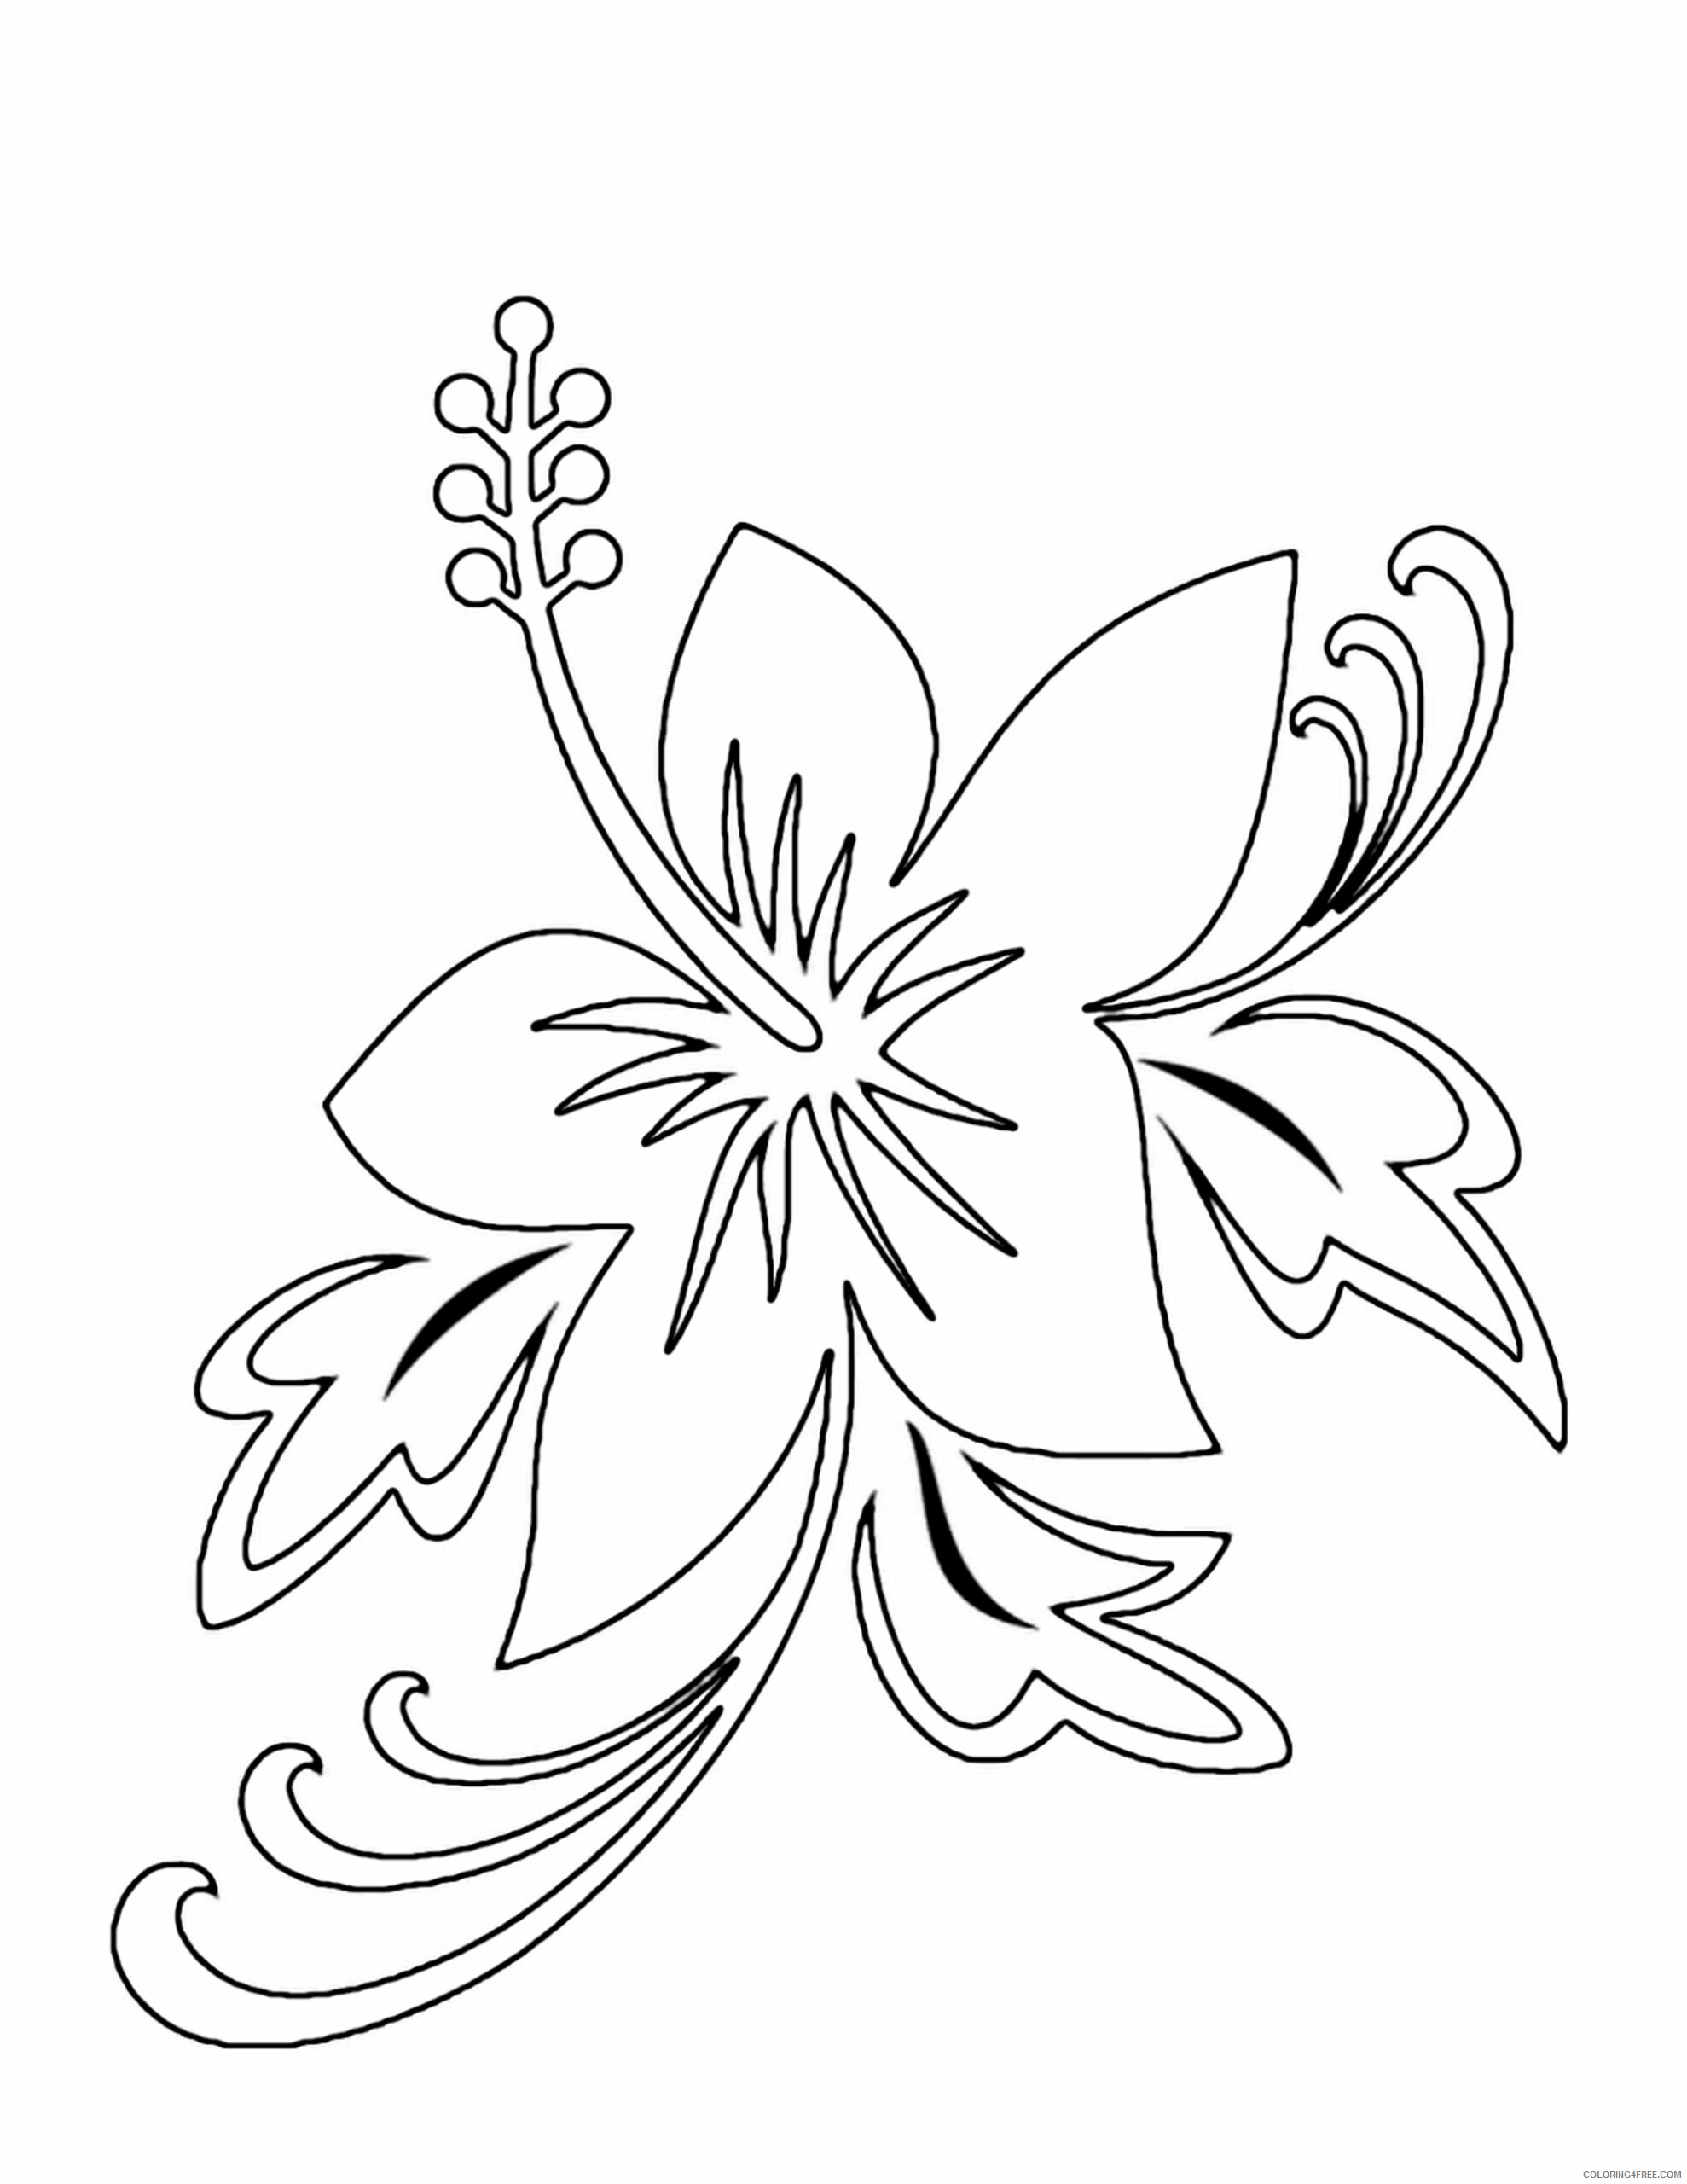 Printable Flower Coloring Pages Flowers Nature flower pictures to print 2021 398 Coloring4free